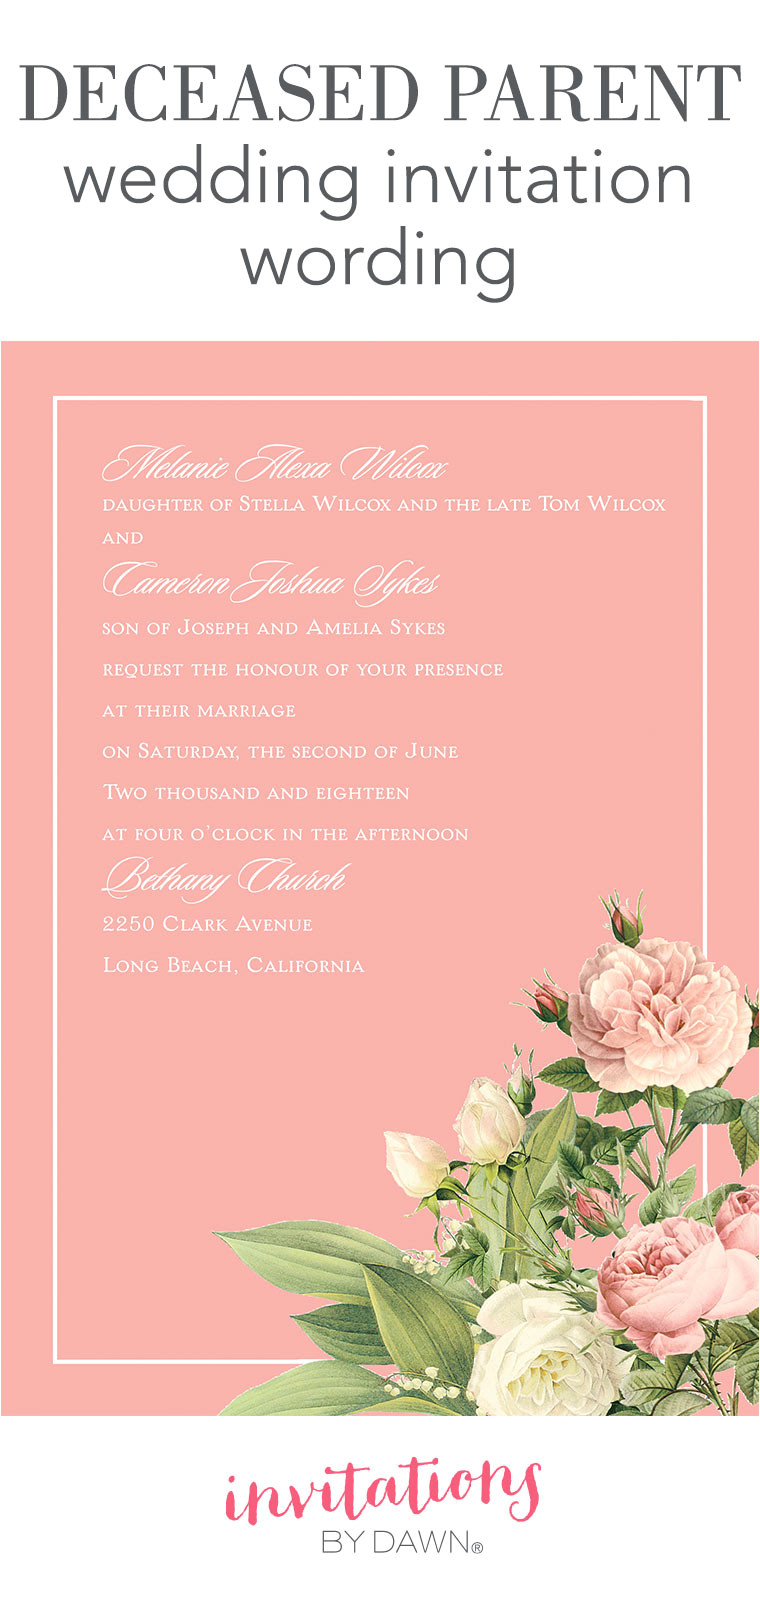 Wedding Card Quotes for Friends Deceased Parent Wedding Invitation Wording Invitations by Dawn